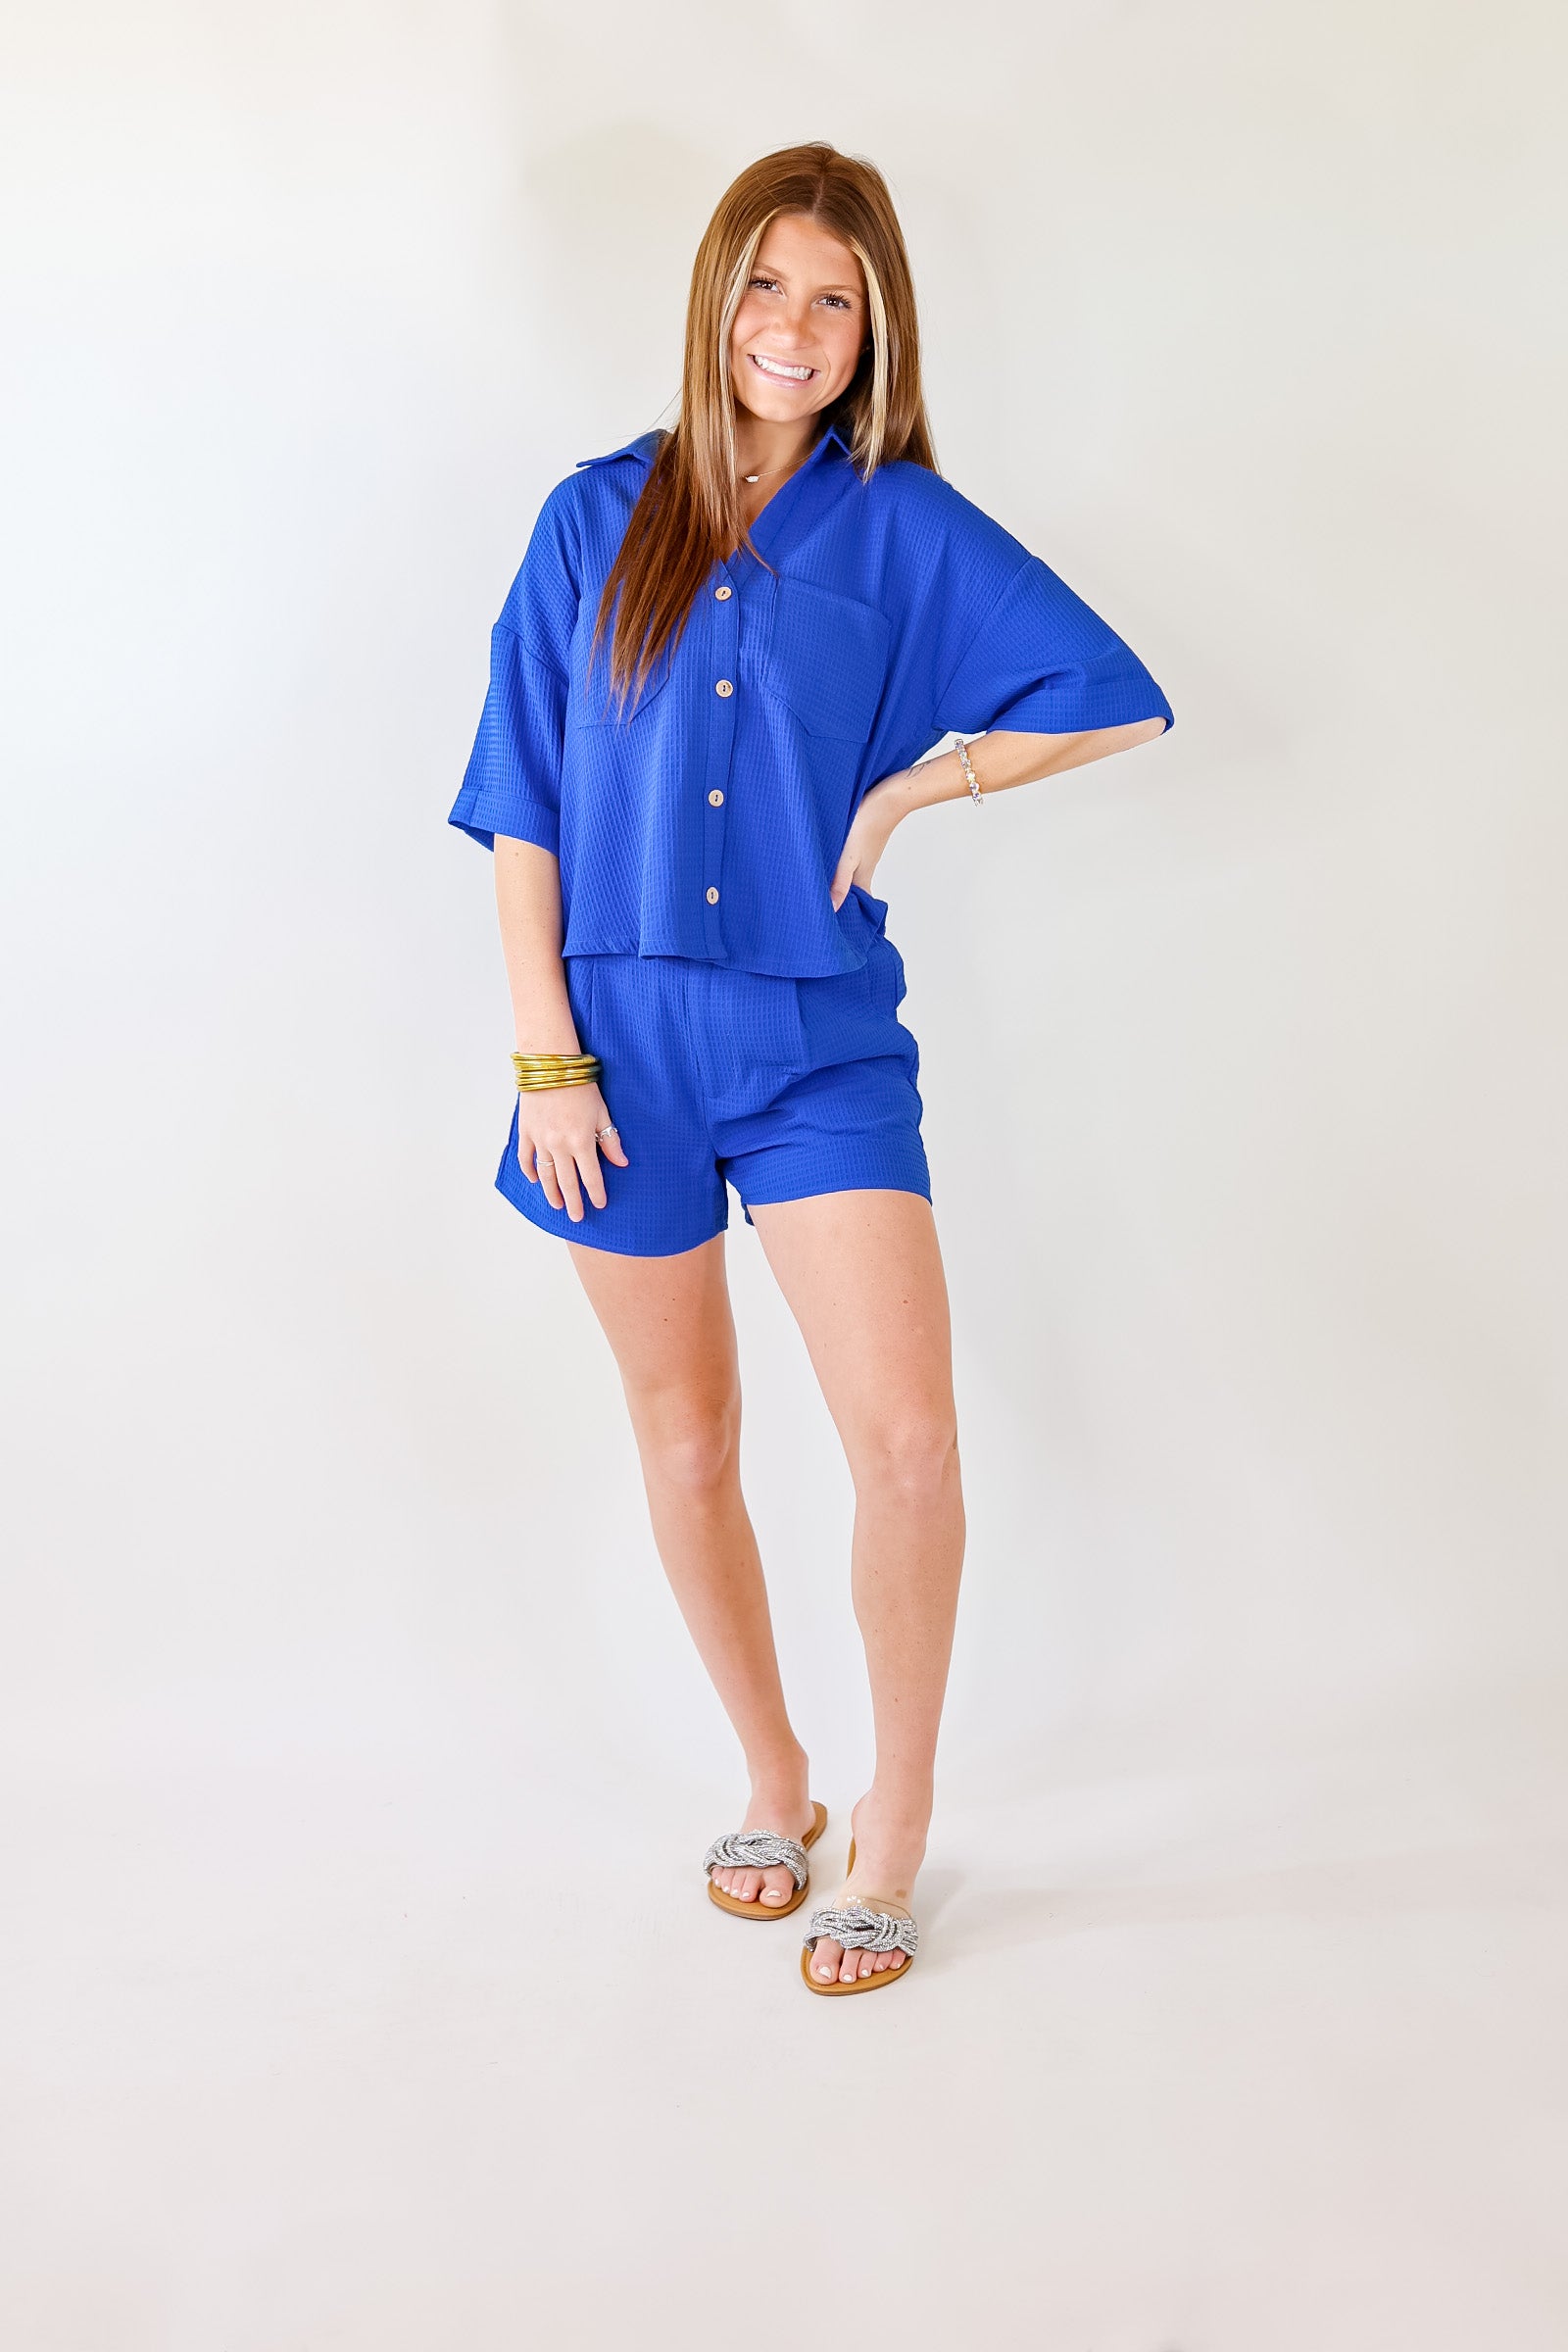 Time To Go Waffle Weave Button Up Top in Royal Blue - Giddy Up Glamour Boutique